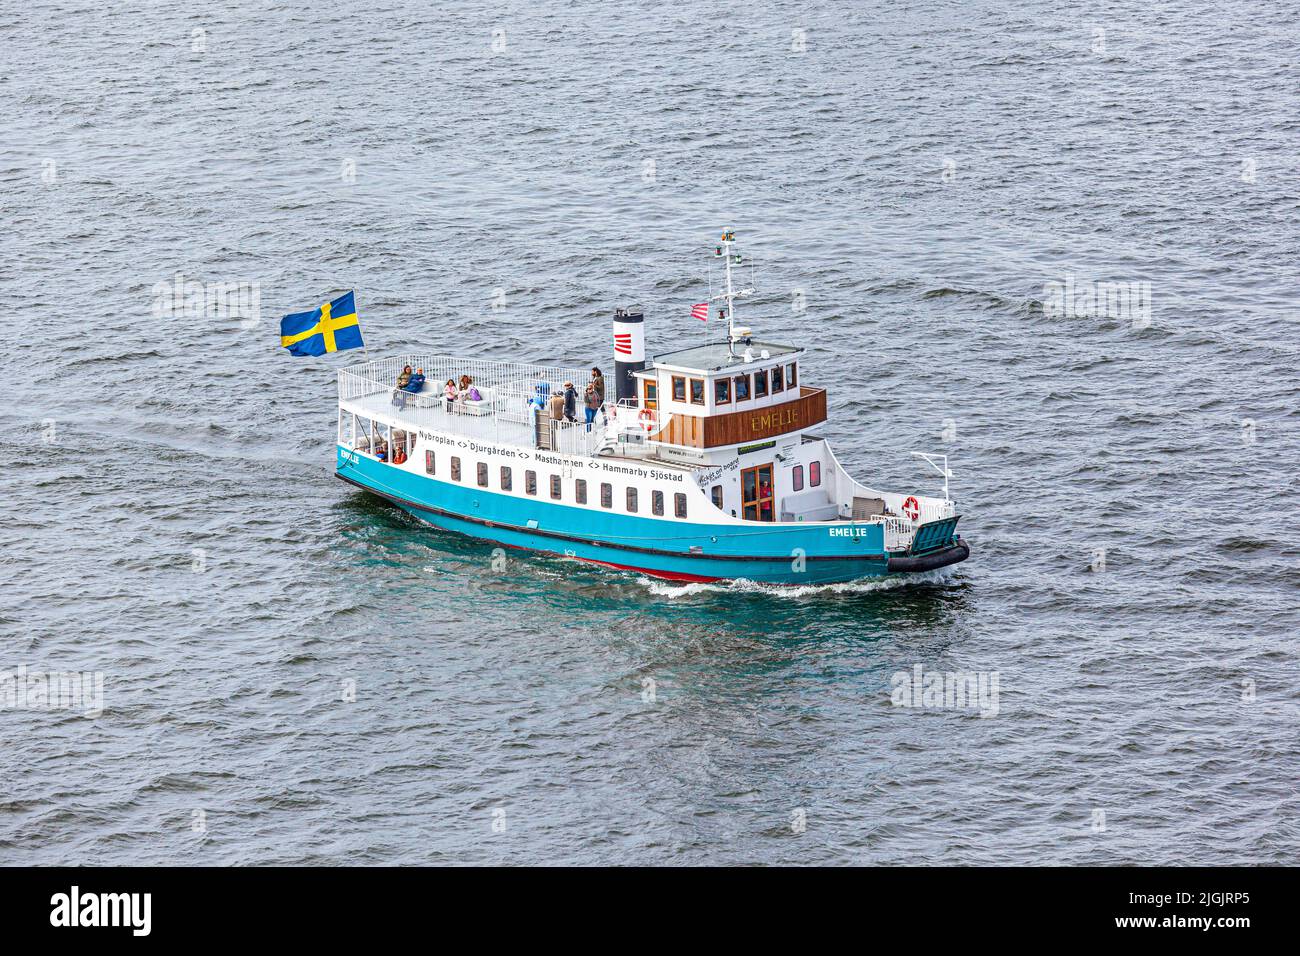 The MS Emelie ferry leaving Stockholm and rounding Djurgården Island into the Stockholm Archipelago, Sweden Stock Photo